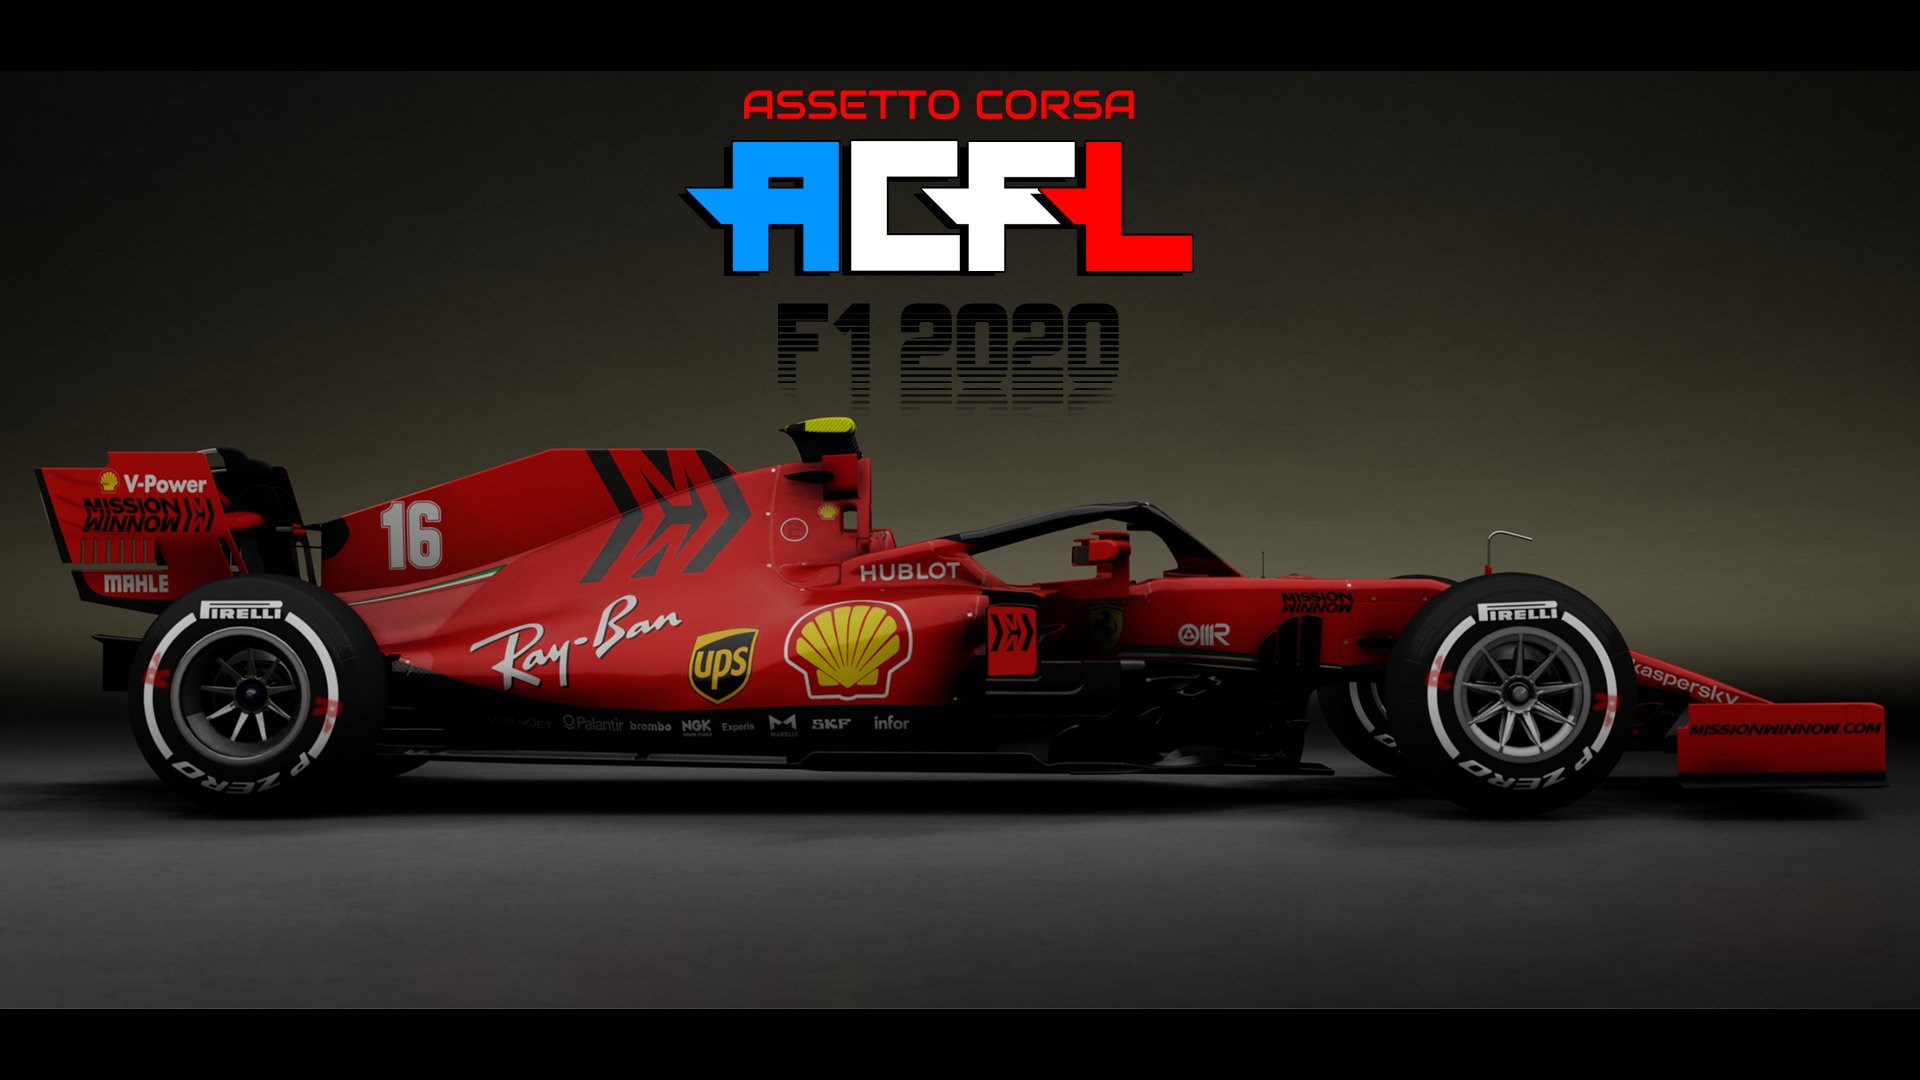 More information about "Assetto Corsa: F1 2020 Season v1.0 by ACFL disponibile"